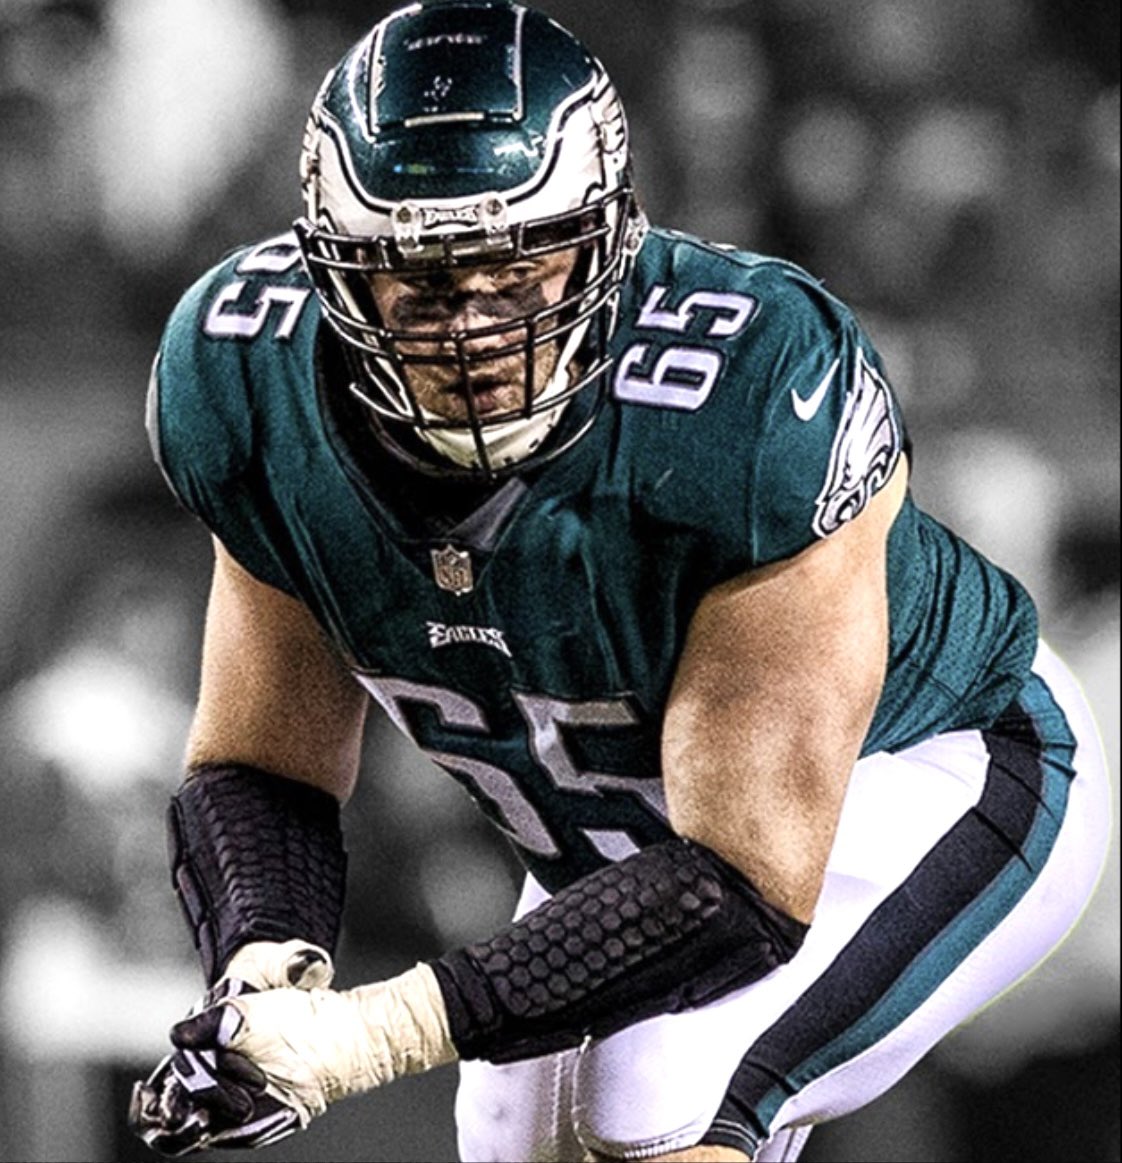 Let’s win this for Lane. RT counts as a DOUBLE vote today. #WPMOYChallenge   Lane Johnson #WPMOYChallenge    Lane Johnson @LaneJohnson65